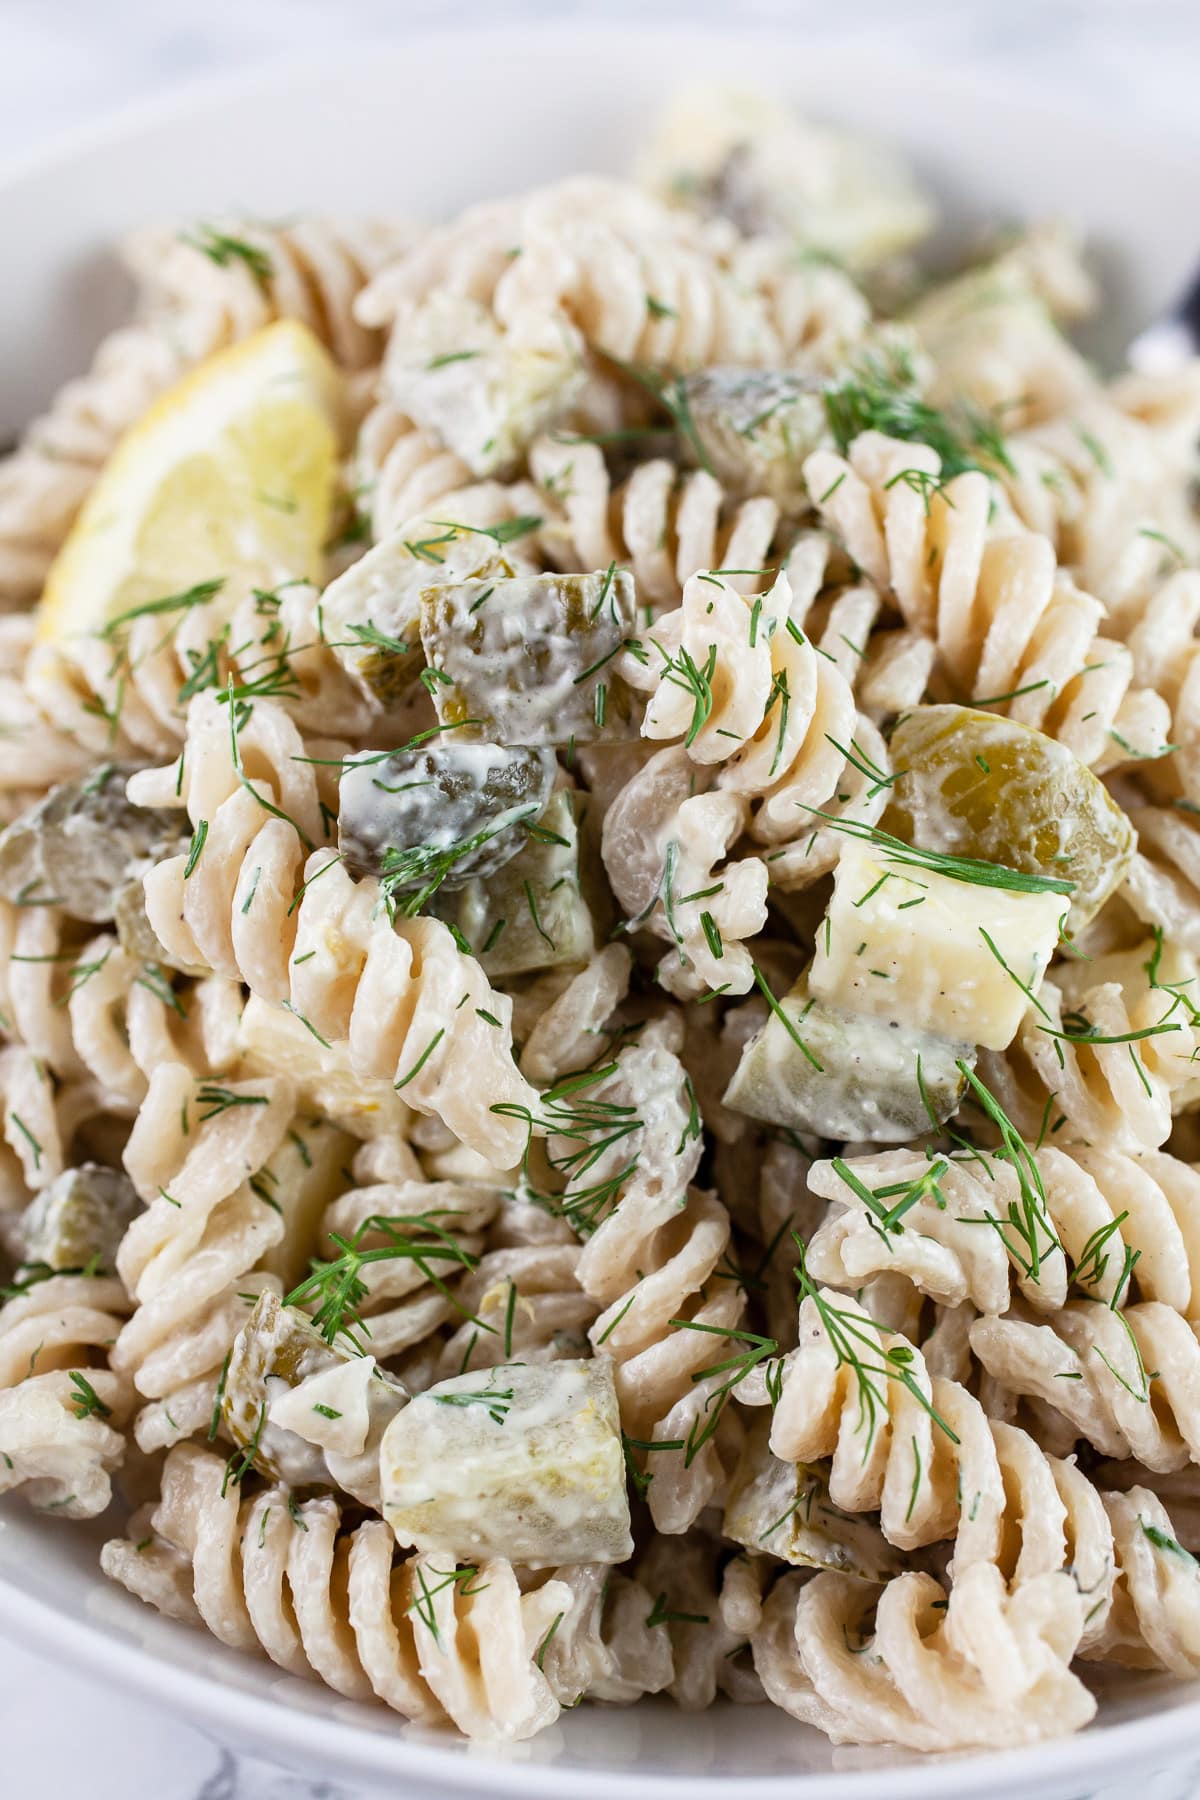 Dill pickle pasta salad in white bowl with lemon wedge.